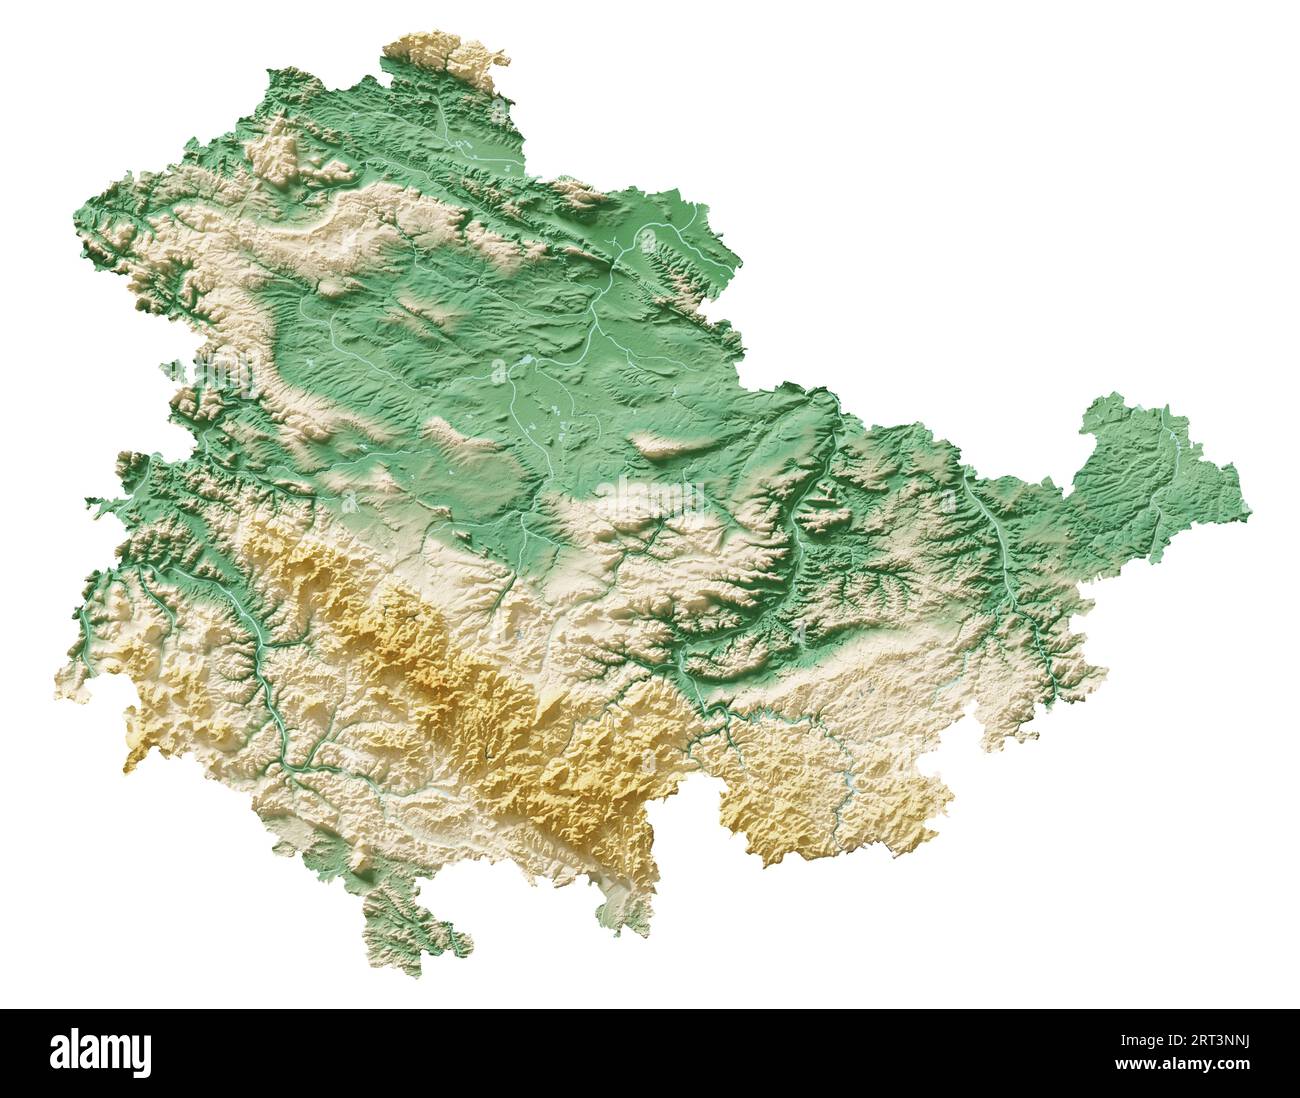 Thüringen (Thuringia). German state (Land). Detailed 3D rendering of a shaded relief map, rivers, lakes. Colored by elevation. Pure white background. Stock Photo